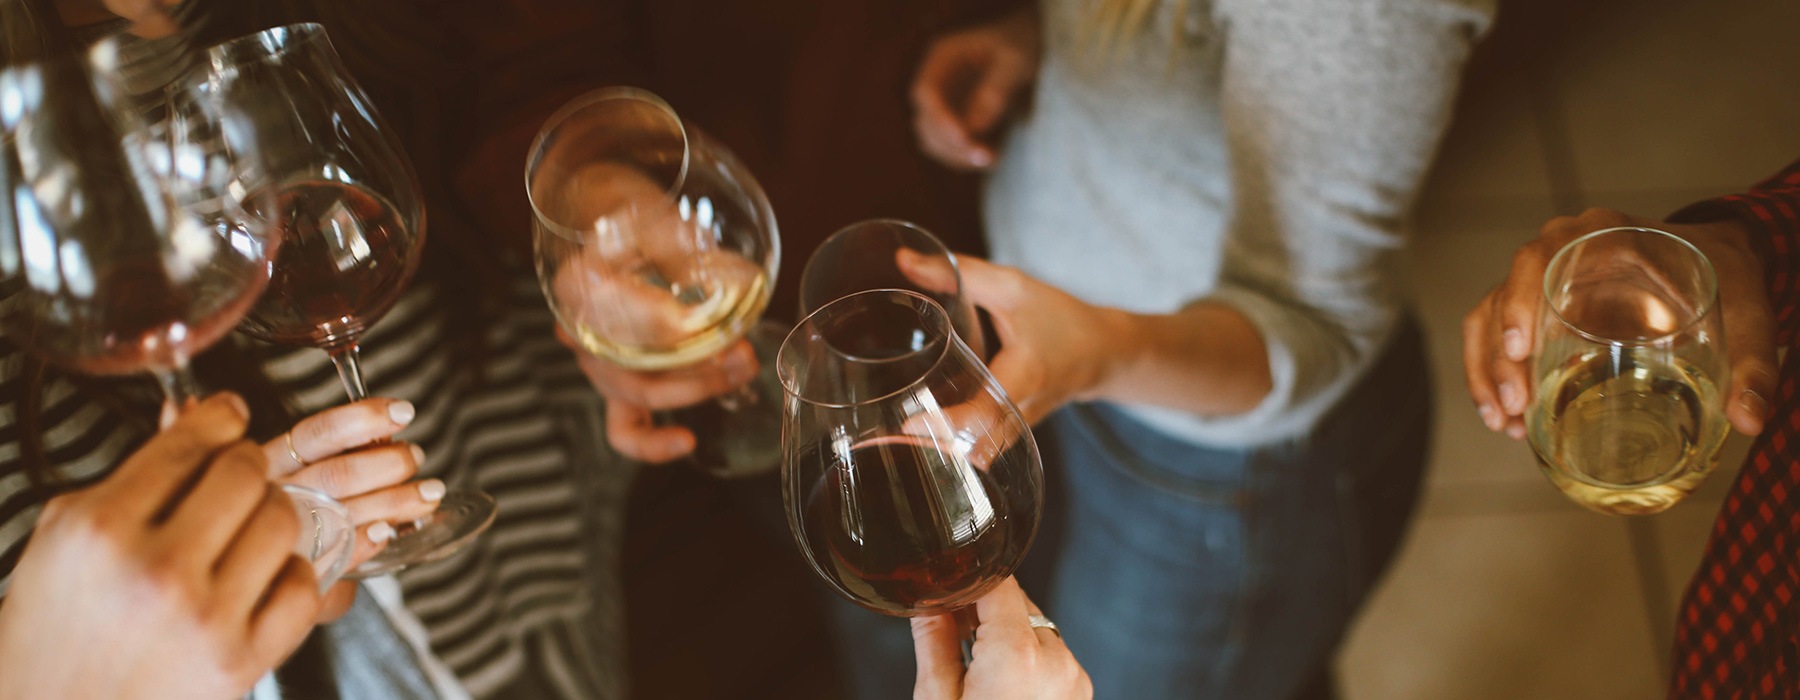 lifestyle image of hands holding wine glasses